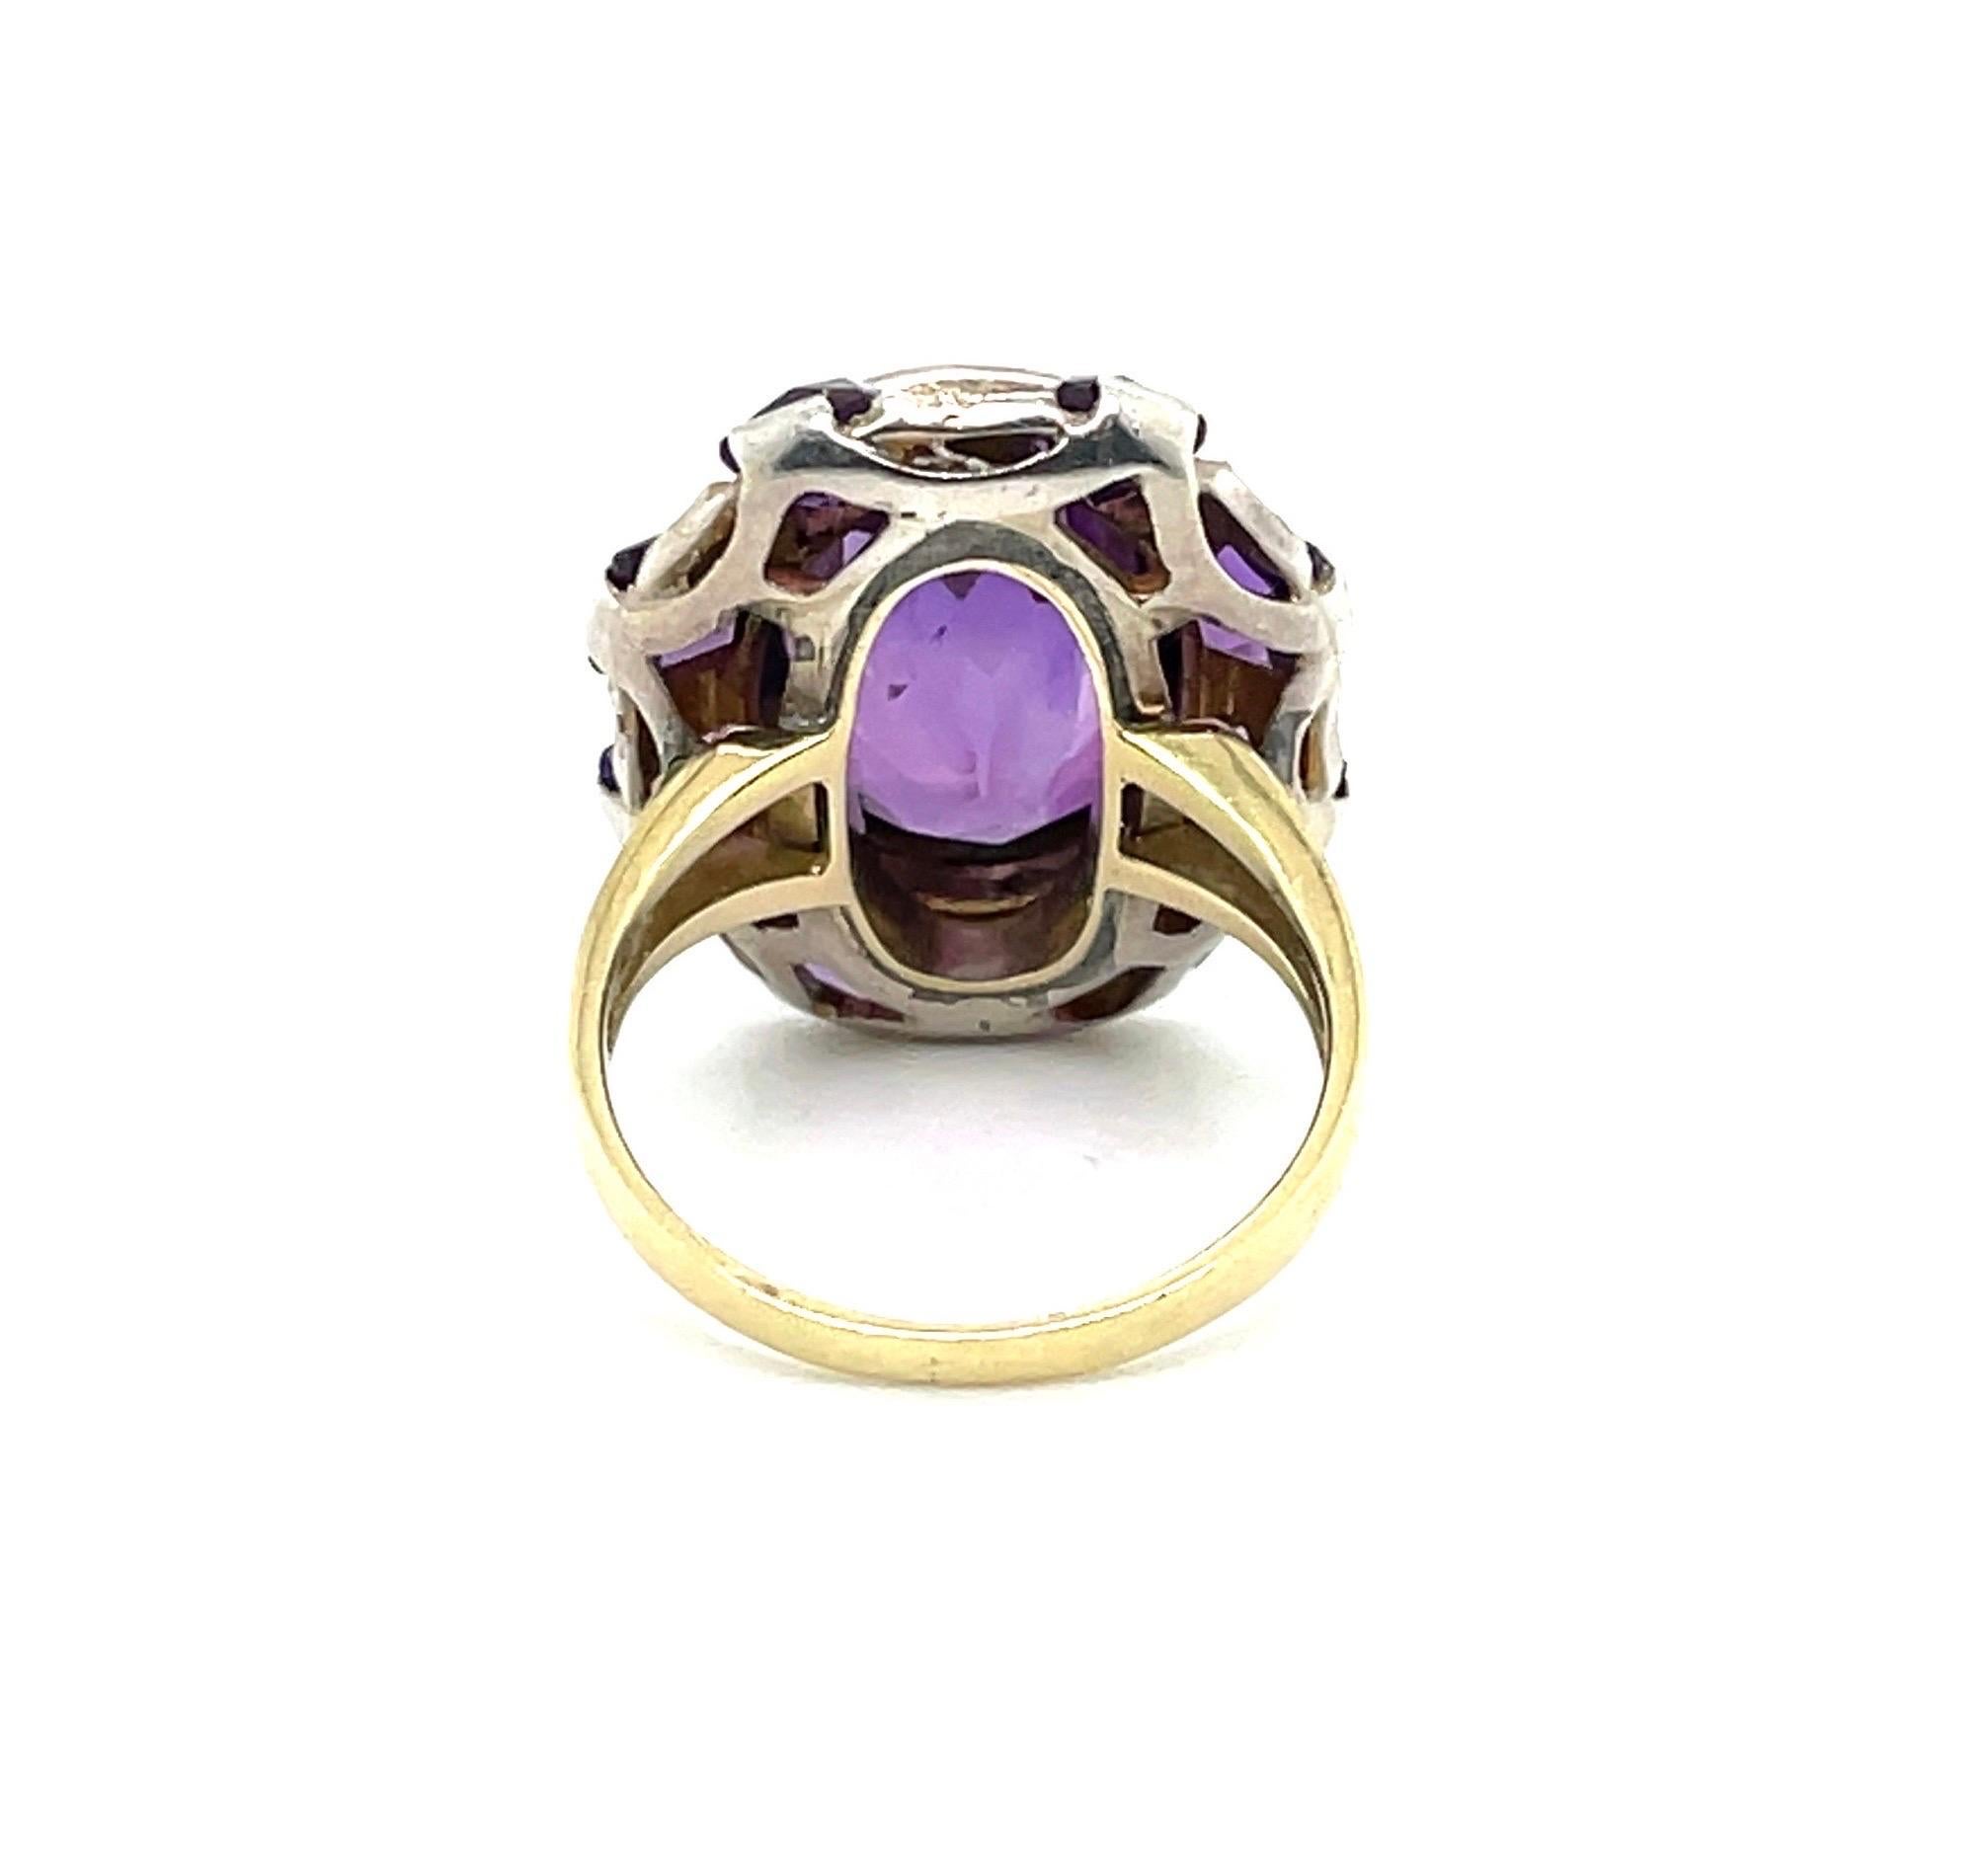 Decorative 14 karat yellow gold, silver, amethyst and seed pearl cocktail ring.

Eye-catching ring, centering upon an oval amethyst of circa 6.4 carats, within a millegrain-setting, alternatingly surrounded by 8 amethysts in French-cut, respectively